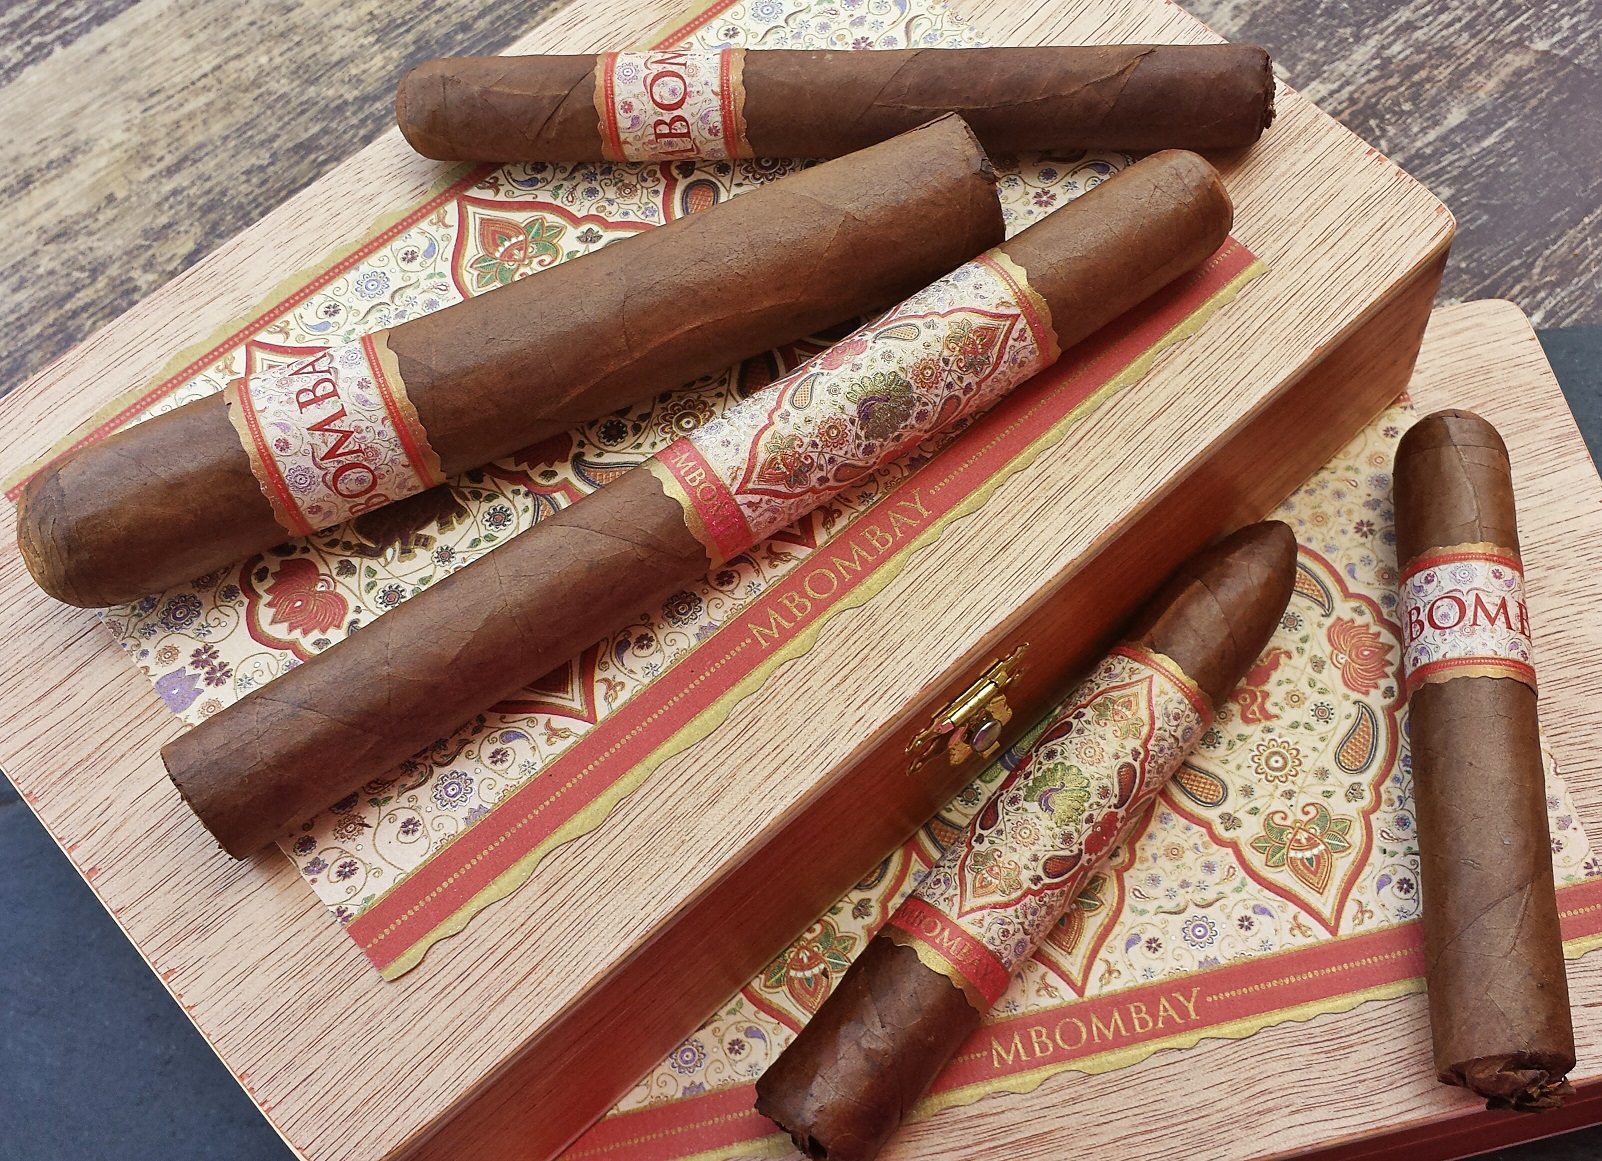 Cigar News: MBombay Announces the Release of their New Habano Blend